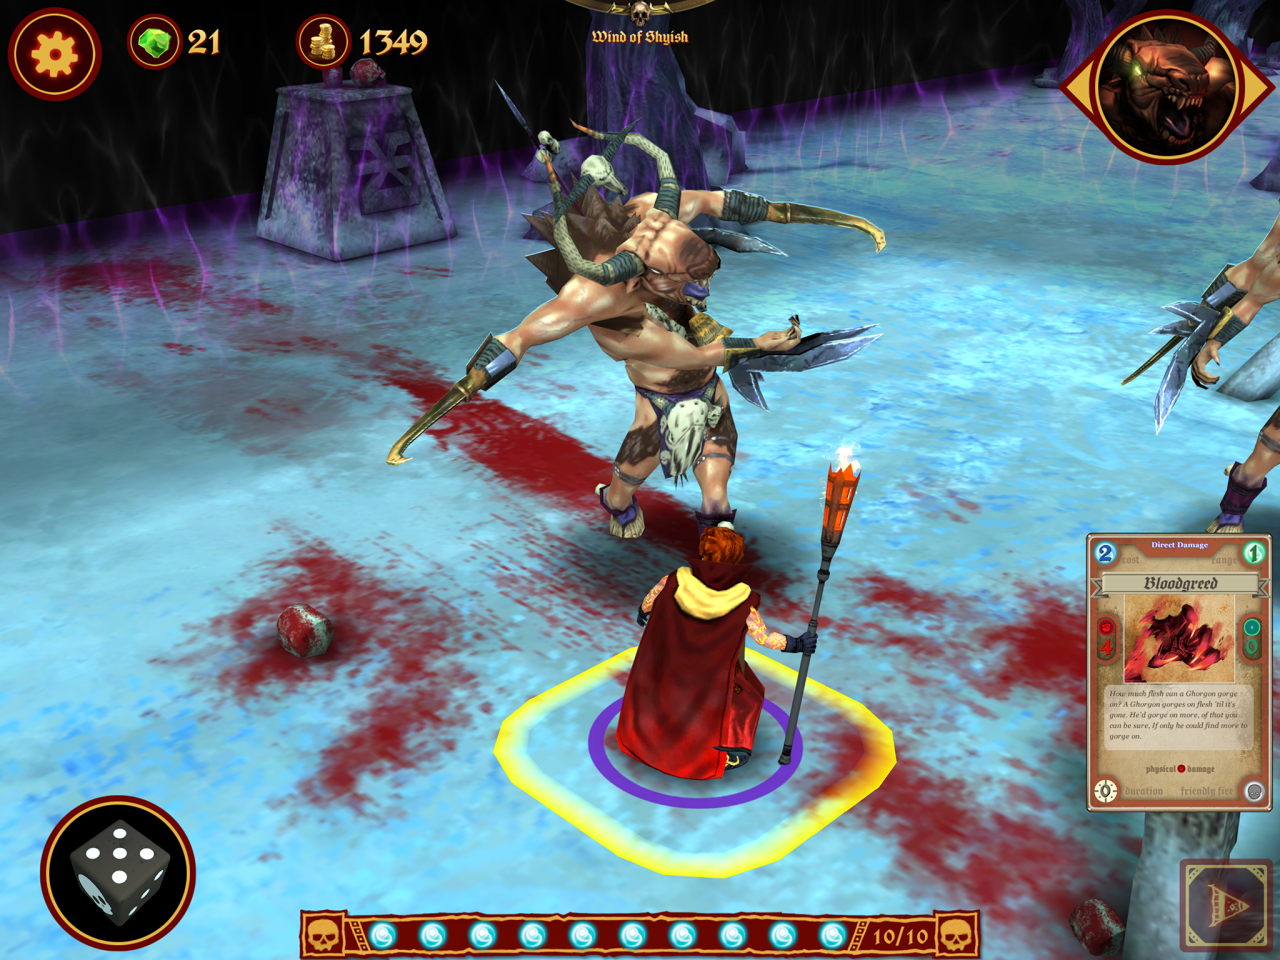 Warhammer: Arcane Magic Comes to iOS TodayVideo Game News Online, Gaming News